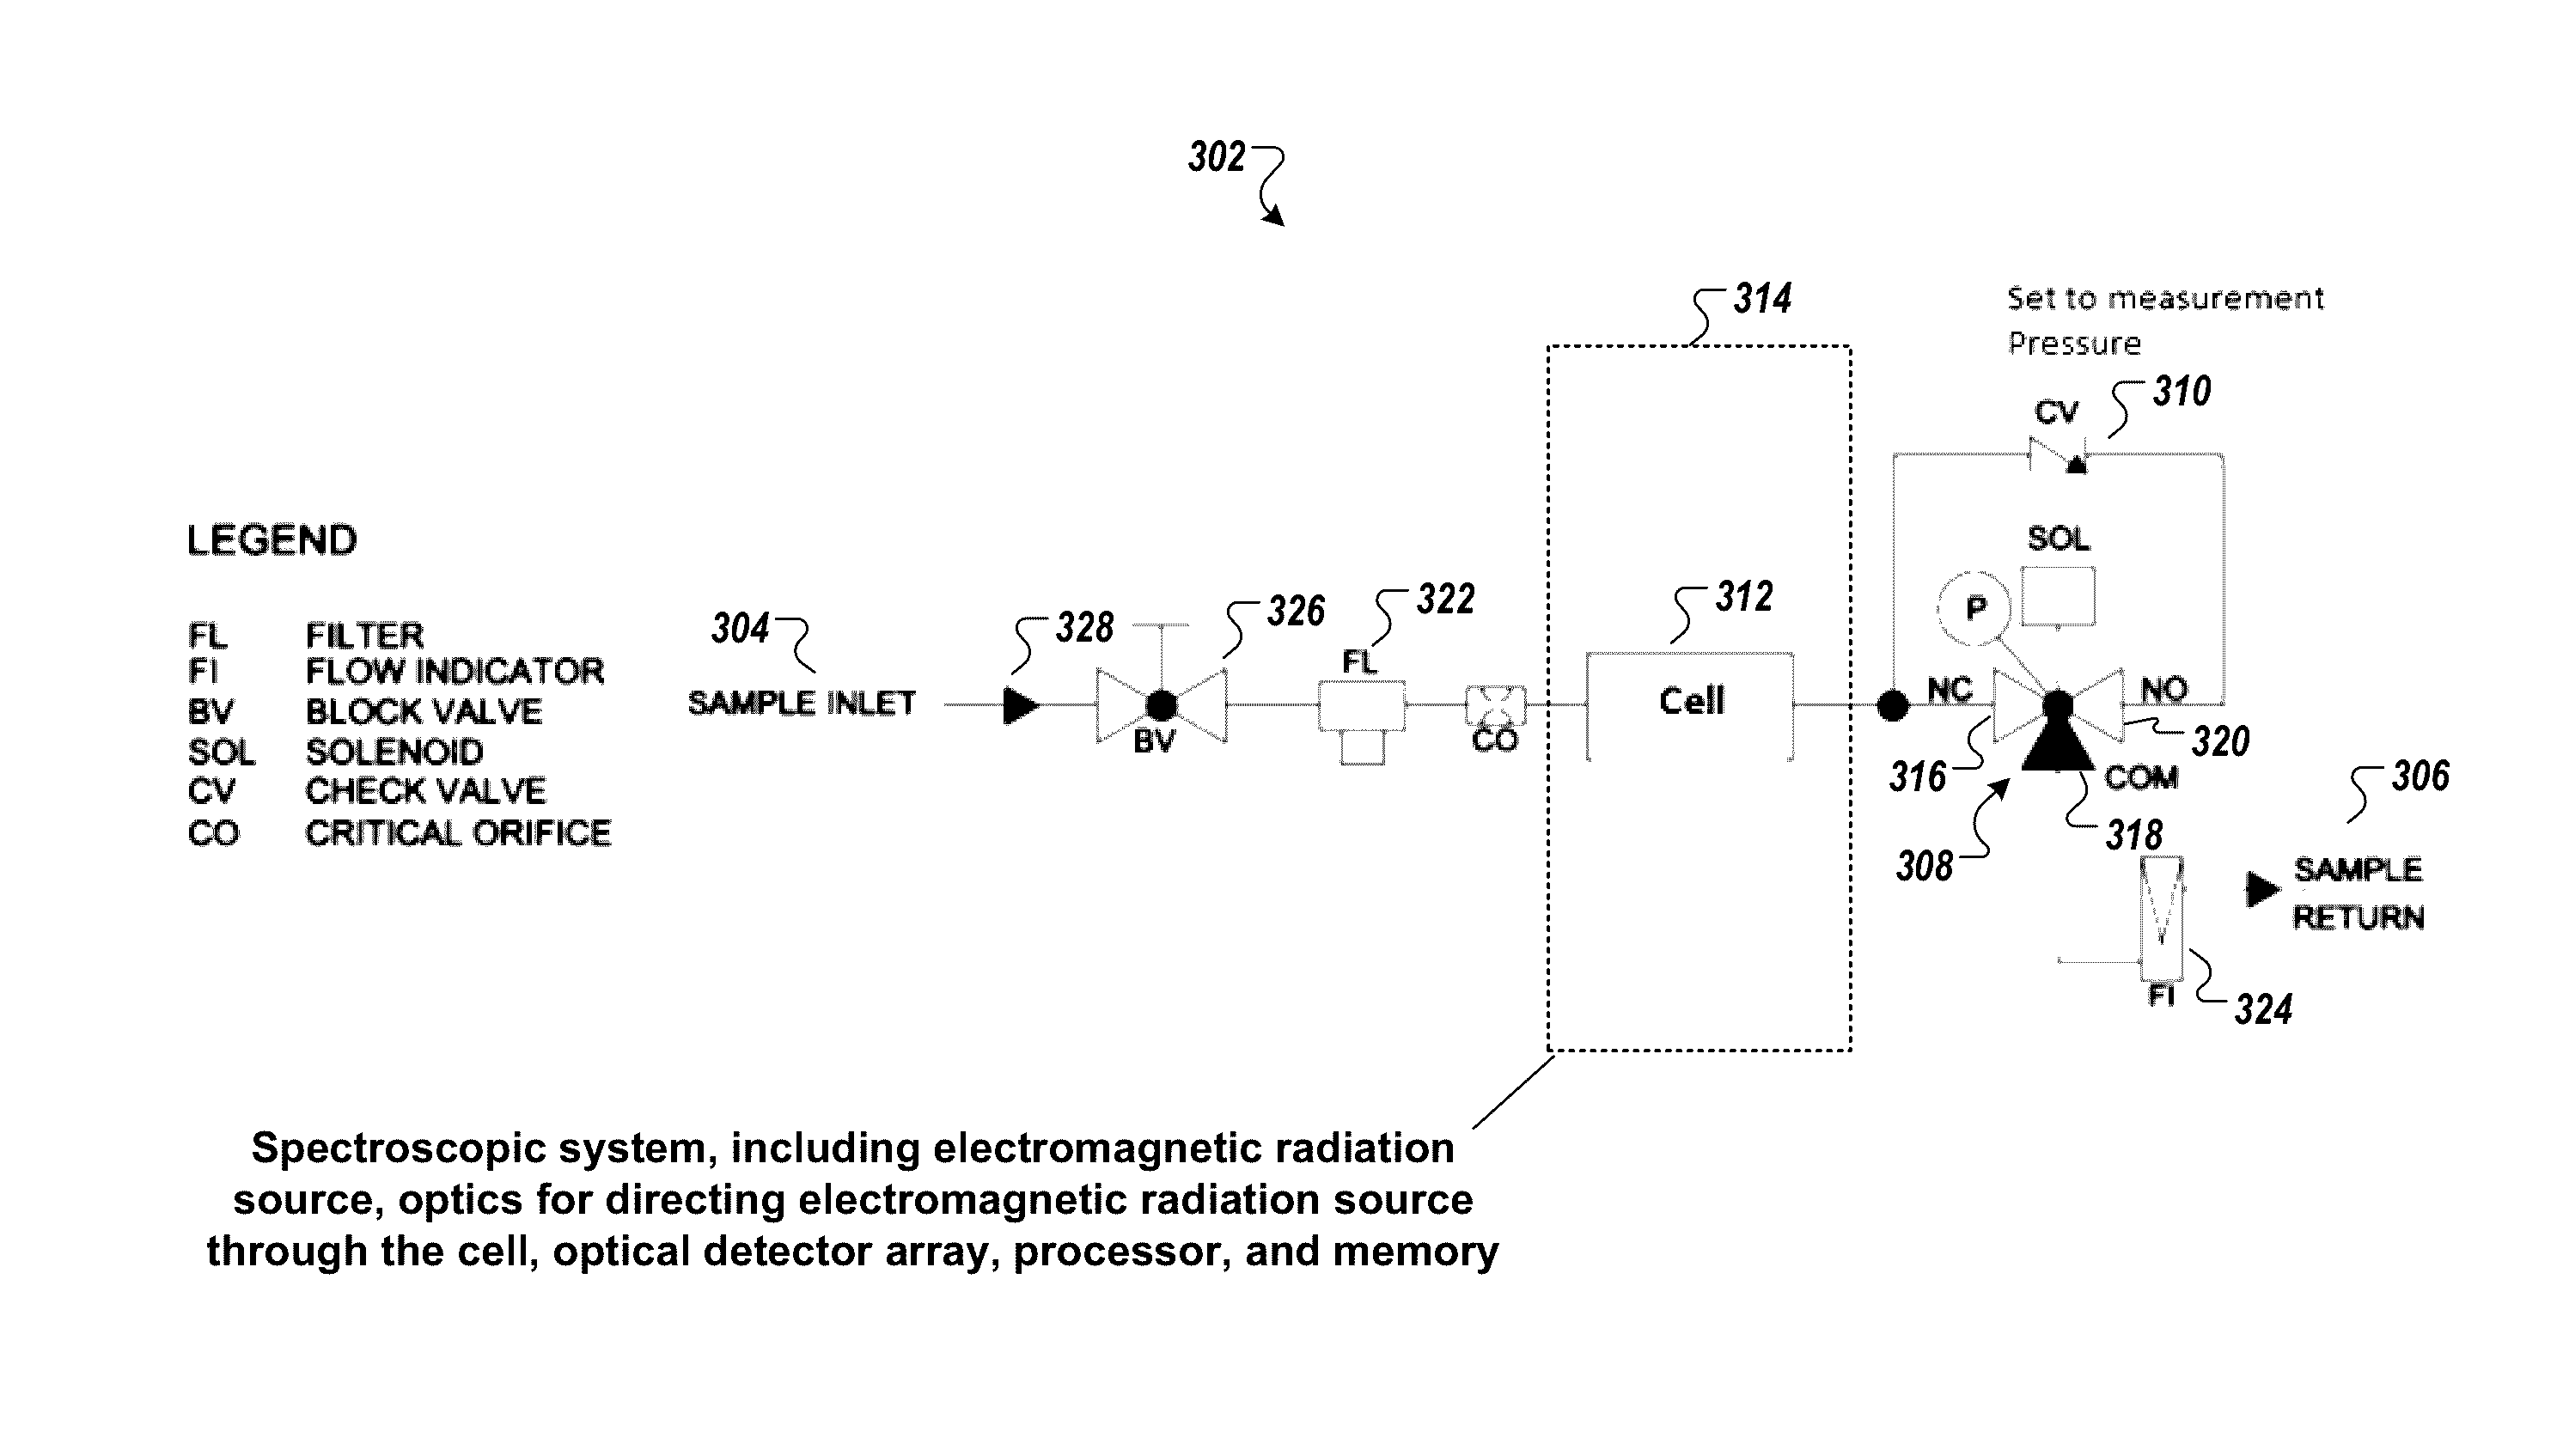 Systems and methods for pressure differential molecular spectroscopy of compressible fluids